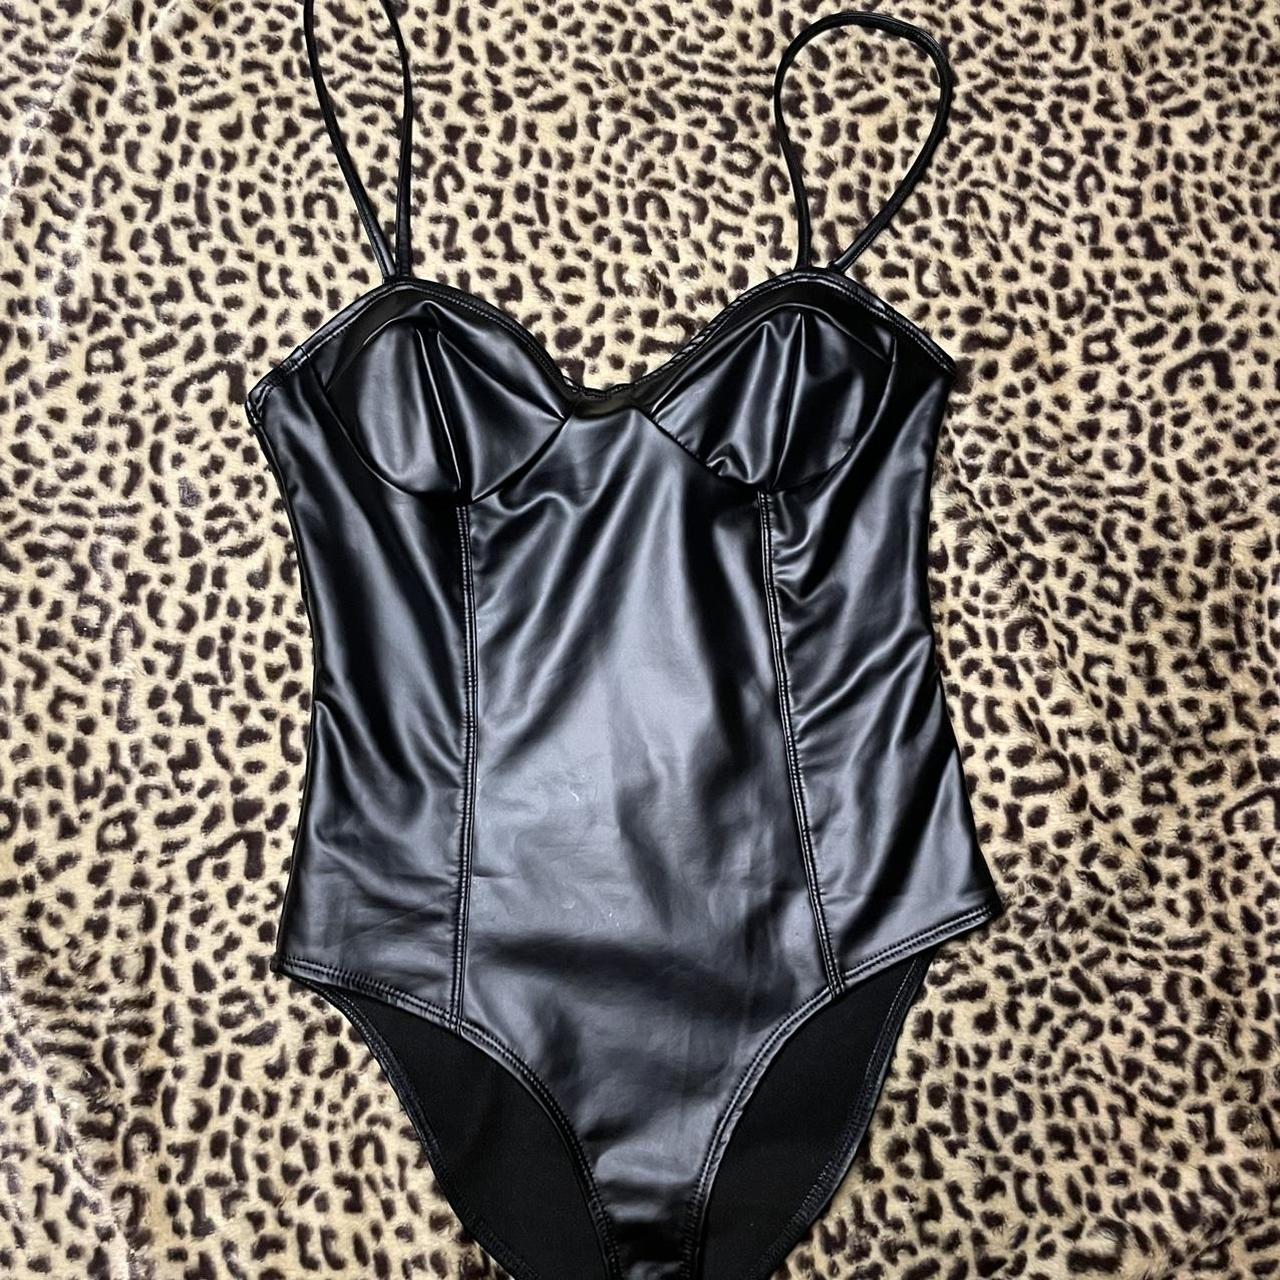 Product Image 1 - Sexy Leather Body Suit 🖤⛓🏴‍☠️

SIZE: